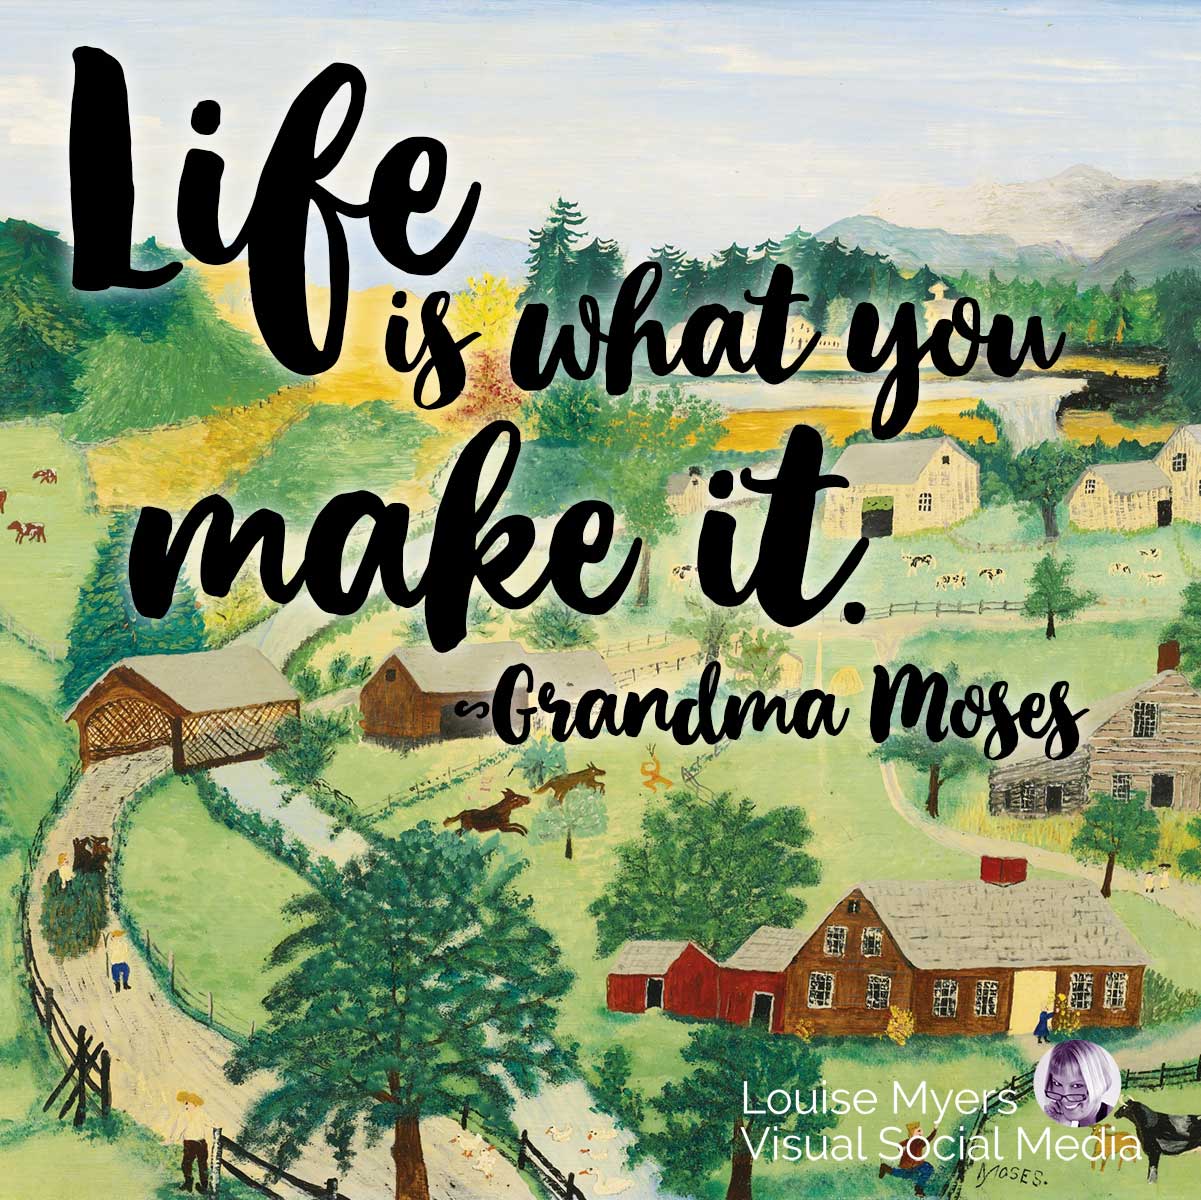 grandma moses folk art with her quote life is what you make it.